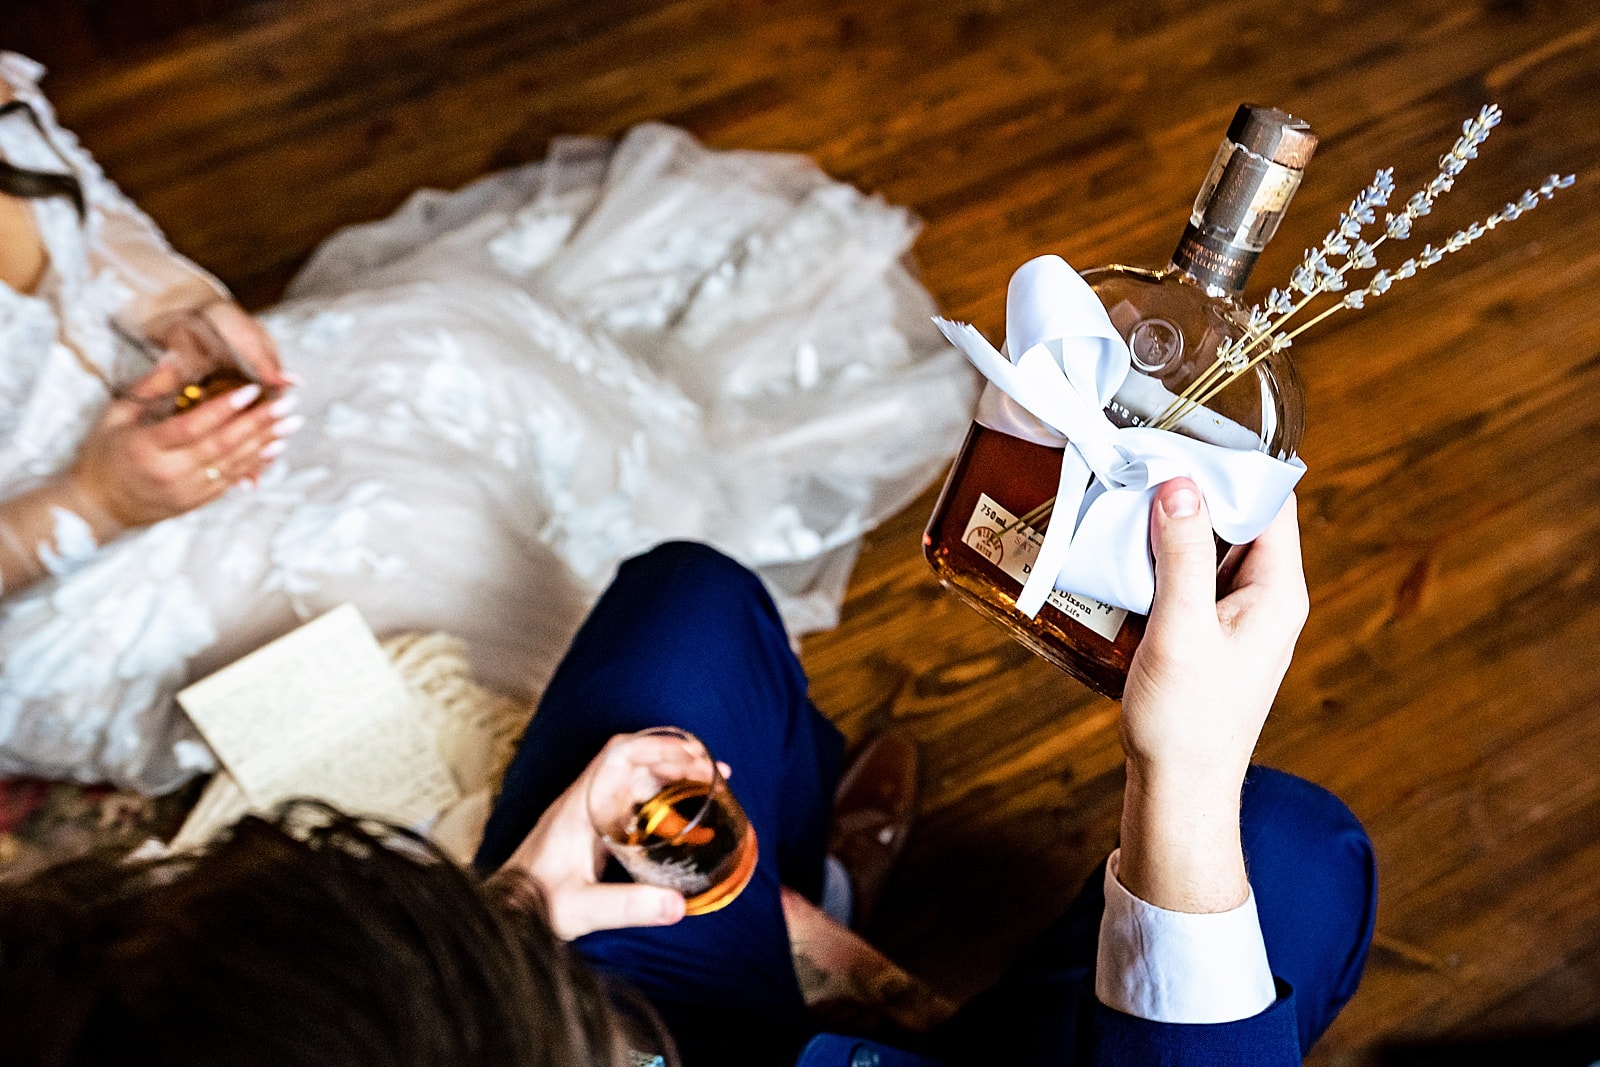 Couple exchanges letters and gifts before their wedding ceremony at Brick & Mortar Events in Clayton, NC